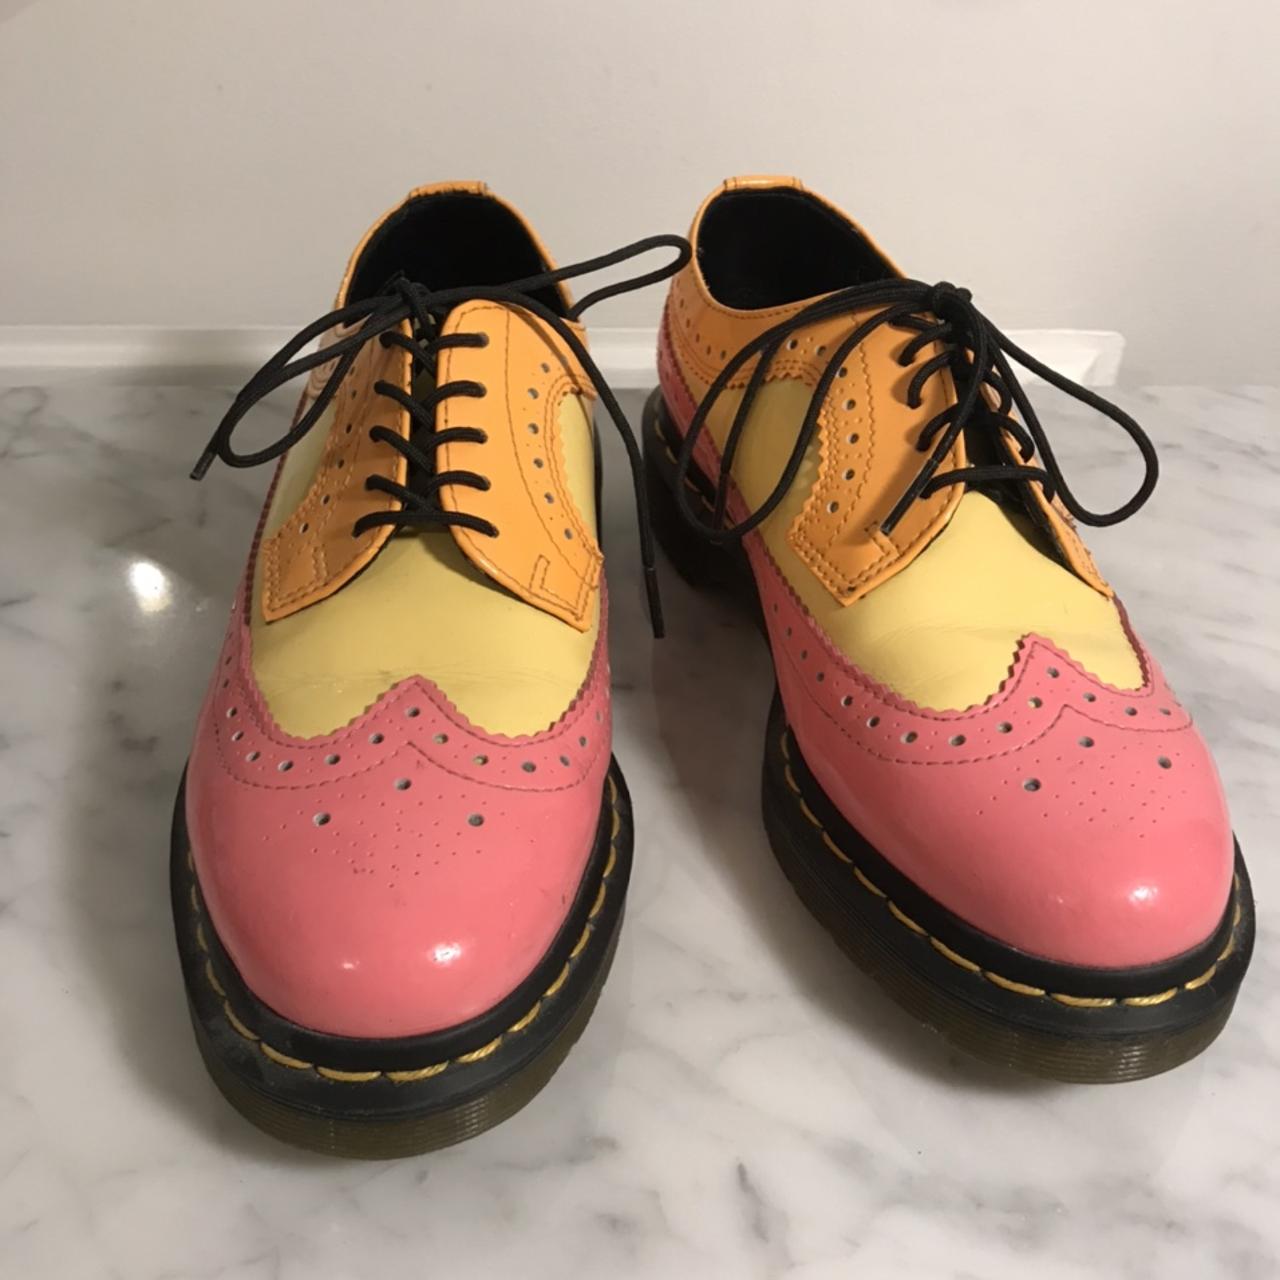 Dr. Martens Women's Yellow and Pink Brogues | Depop